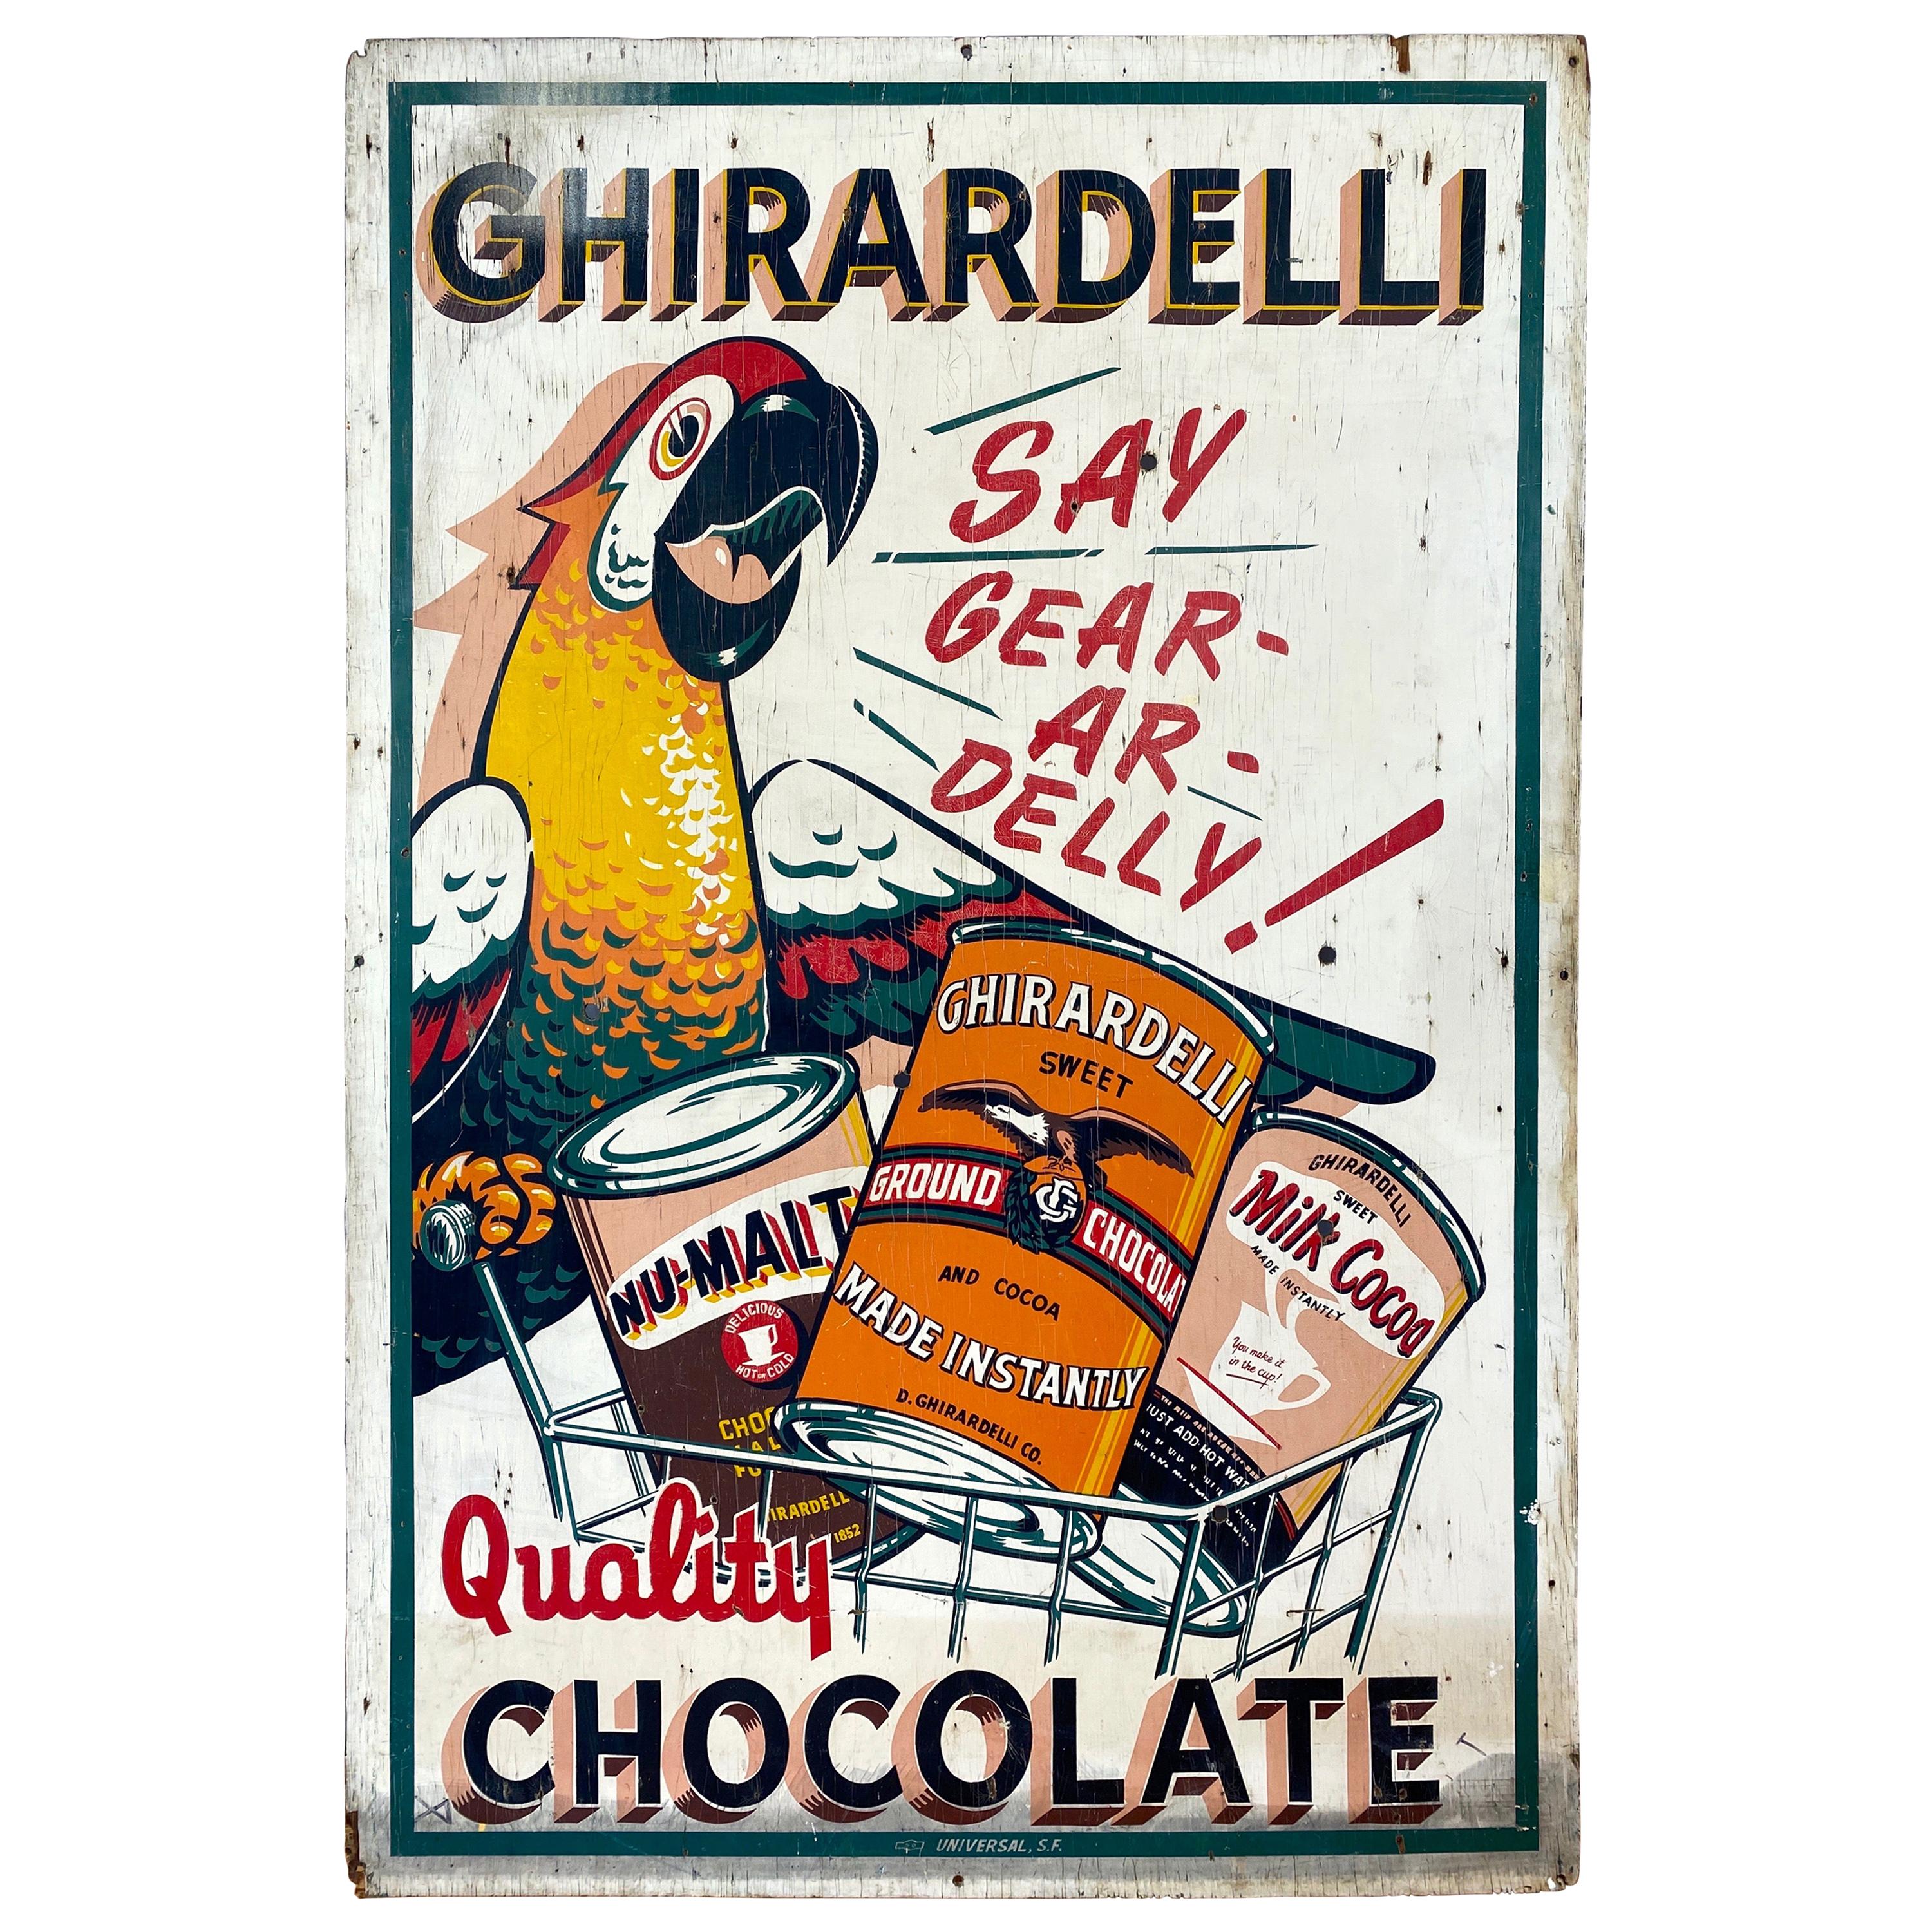 Huge Ghirardelli Chocolate Parrot Mascot Painted Wood Advertising Sign, 1930s